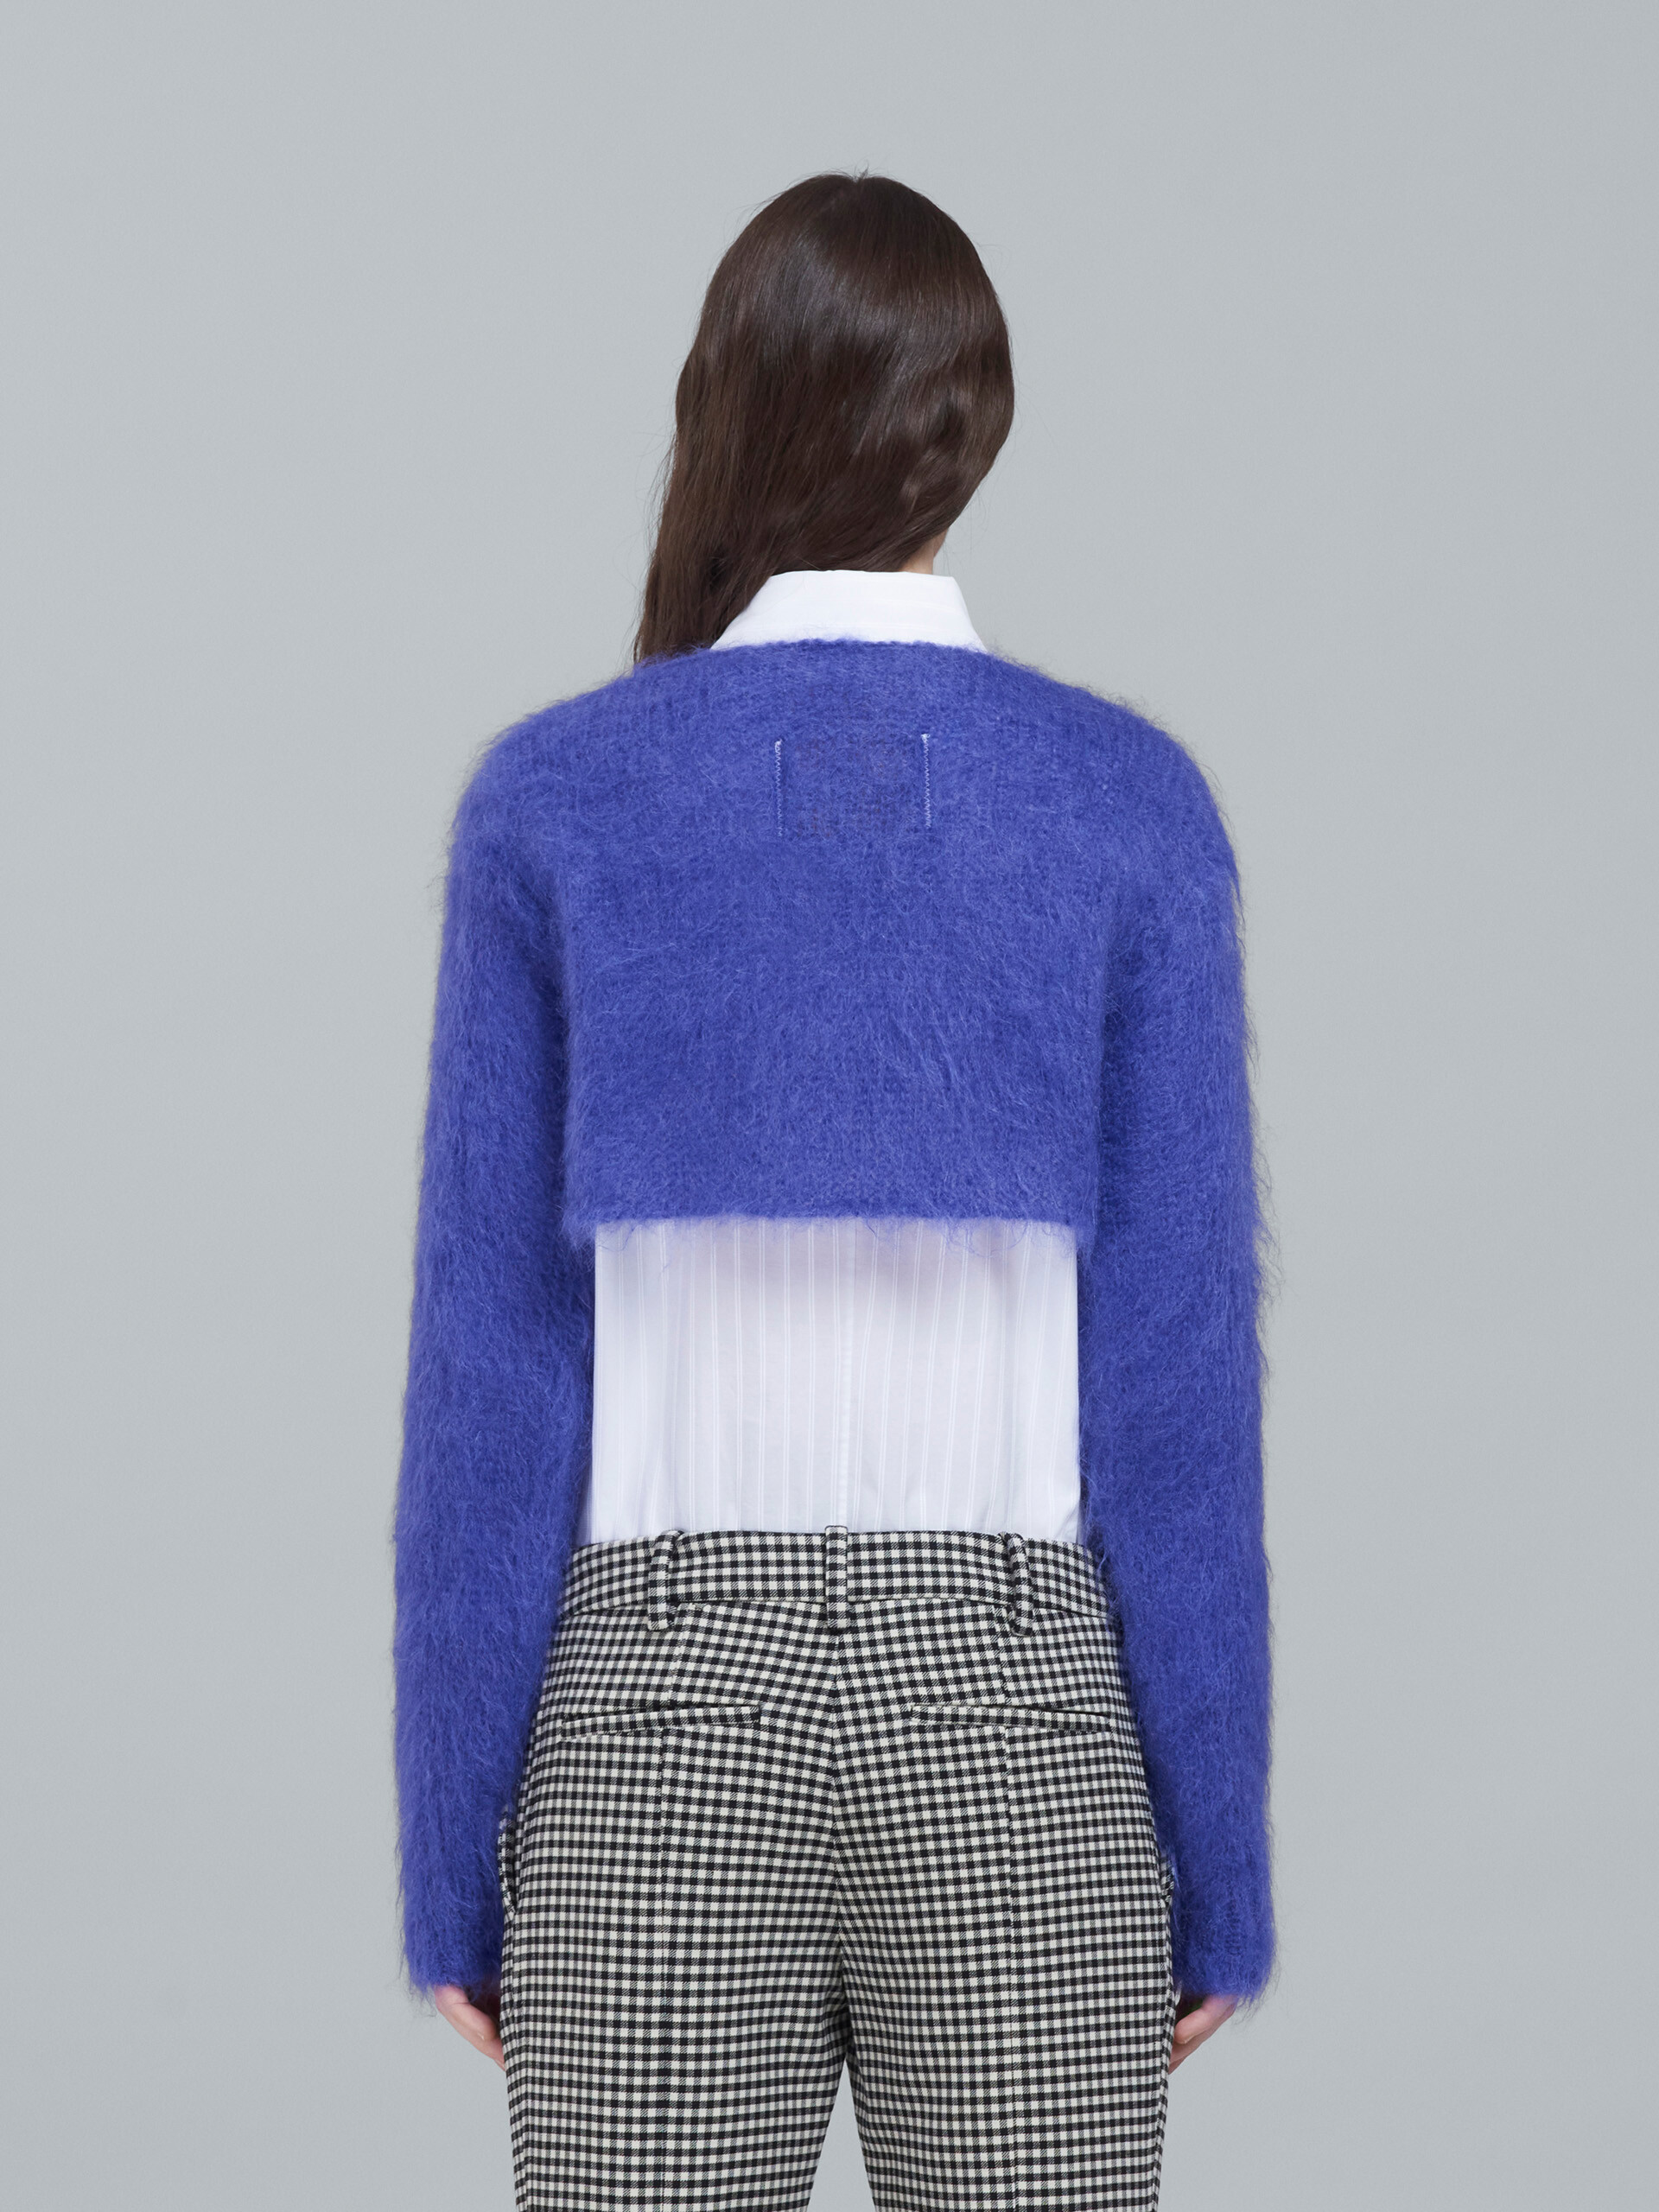 Mohair and wool crewneck cropped sweater - Pullovers - Image 3